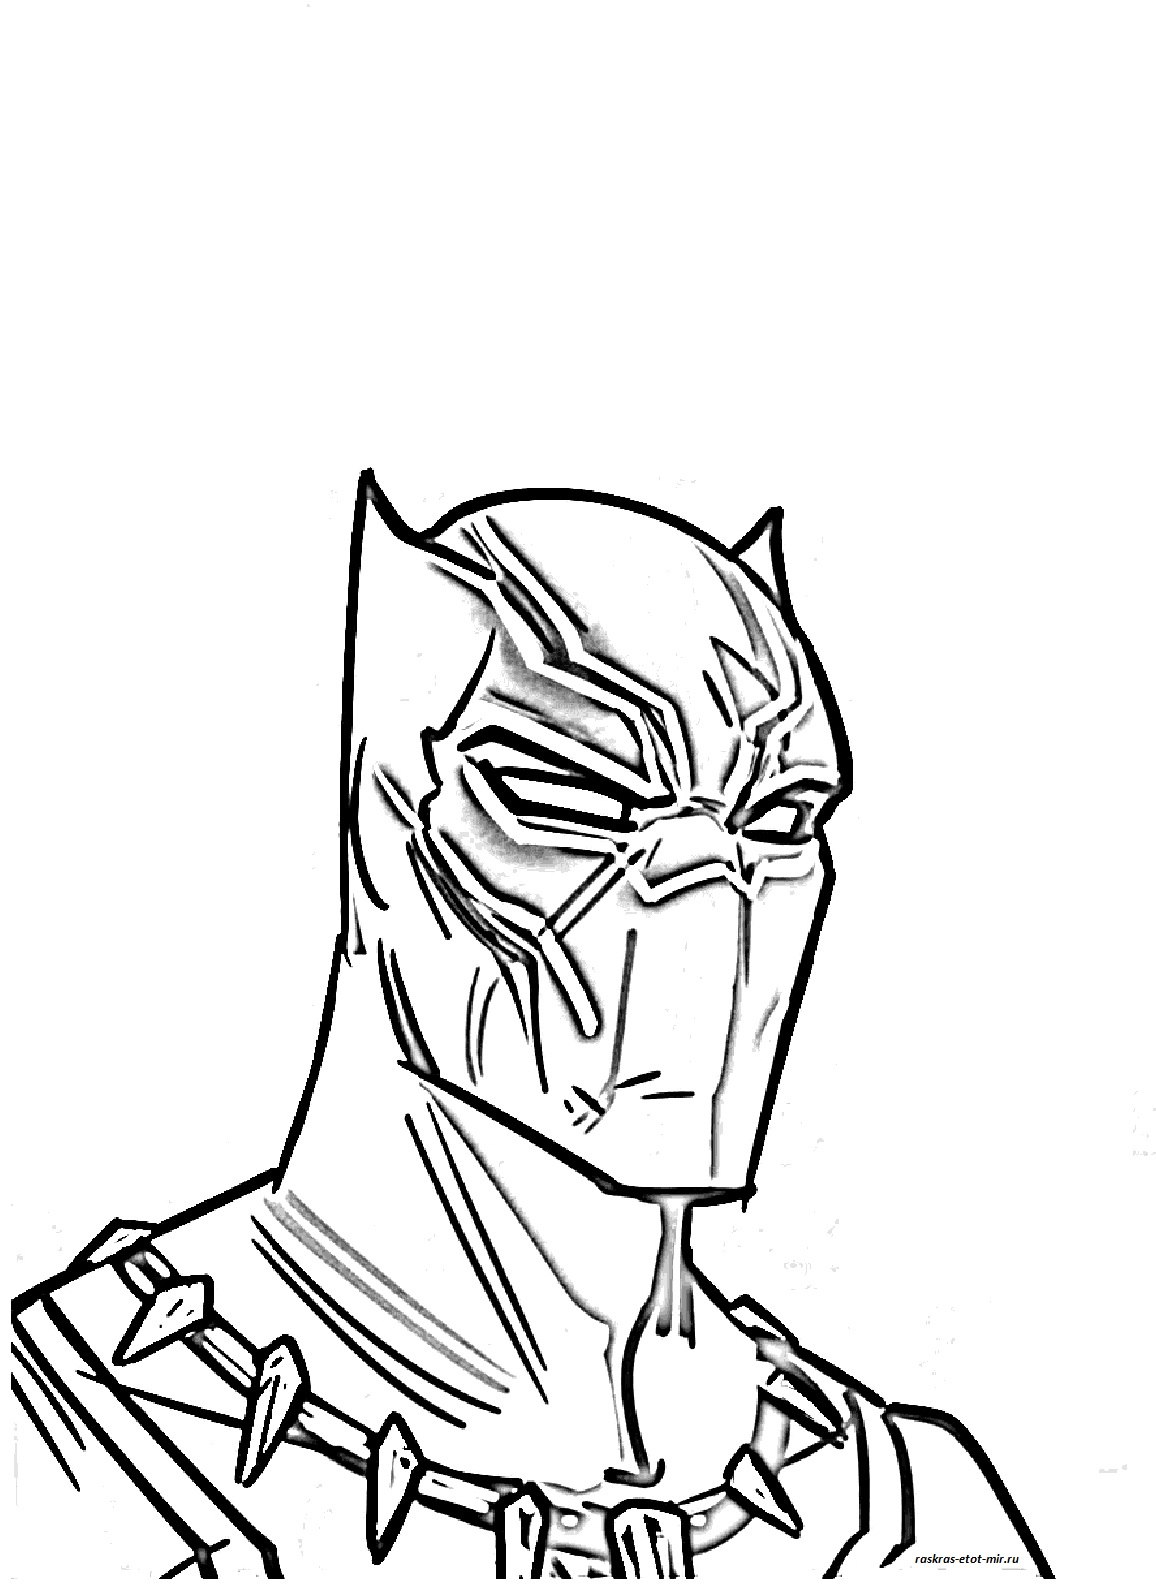 Black Panther Coloring pages 🖌 to print and color